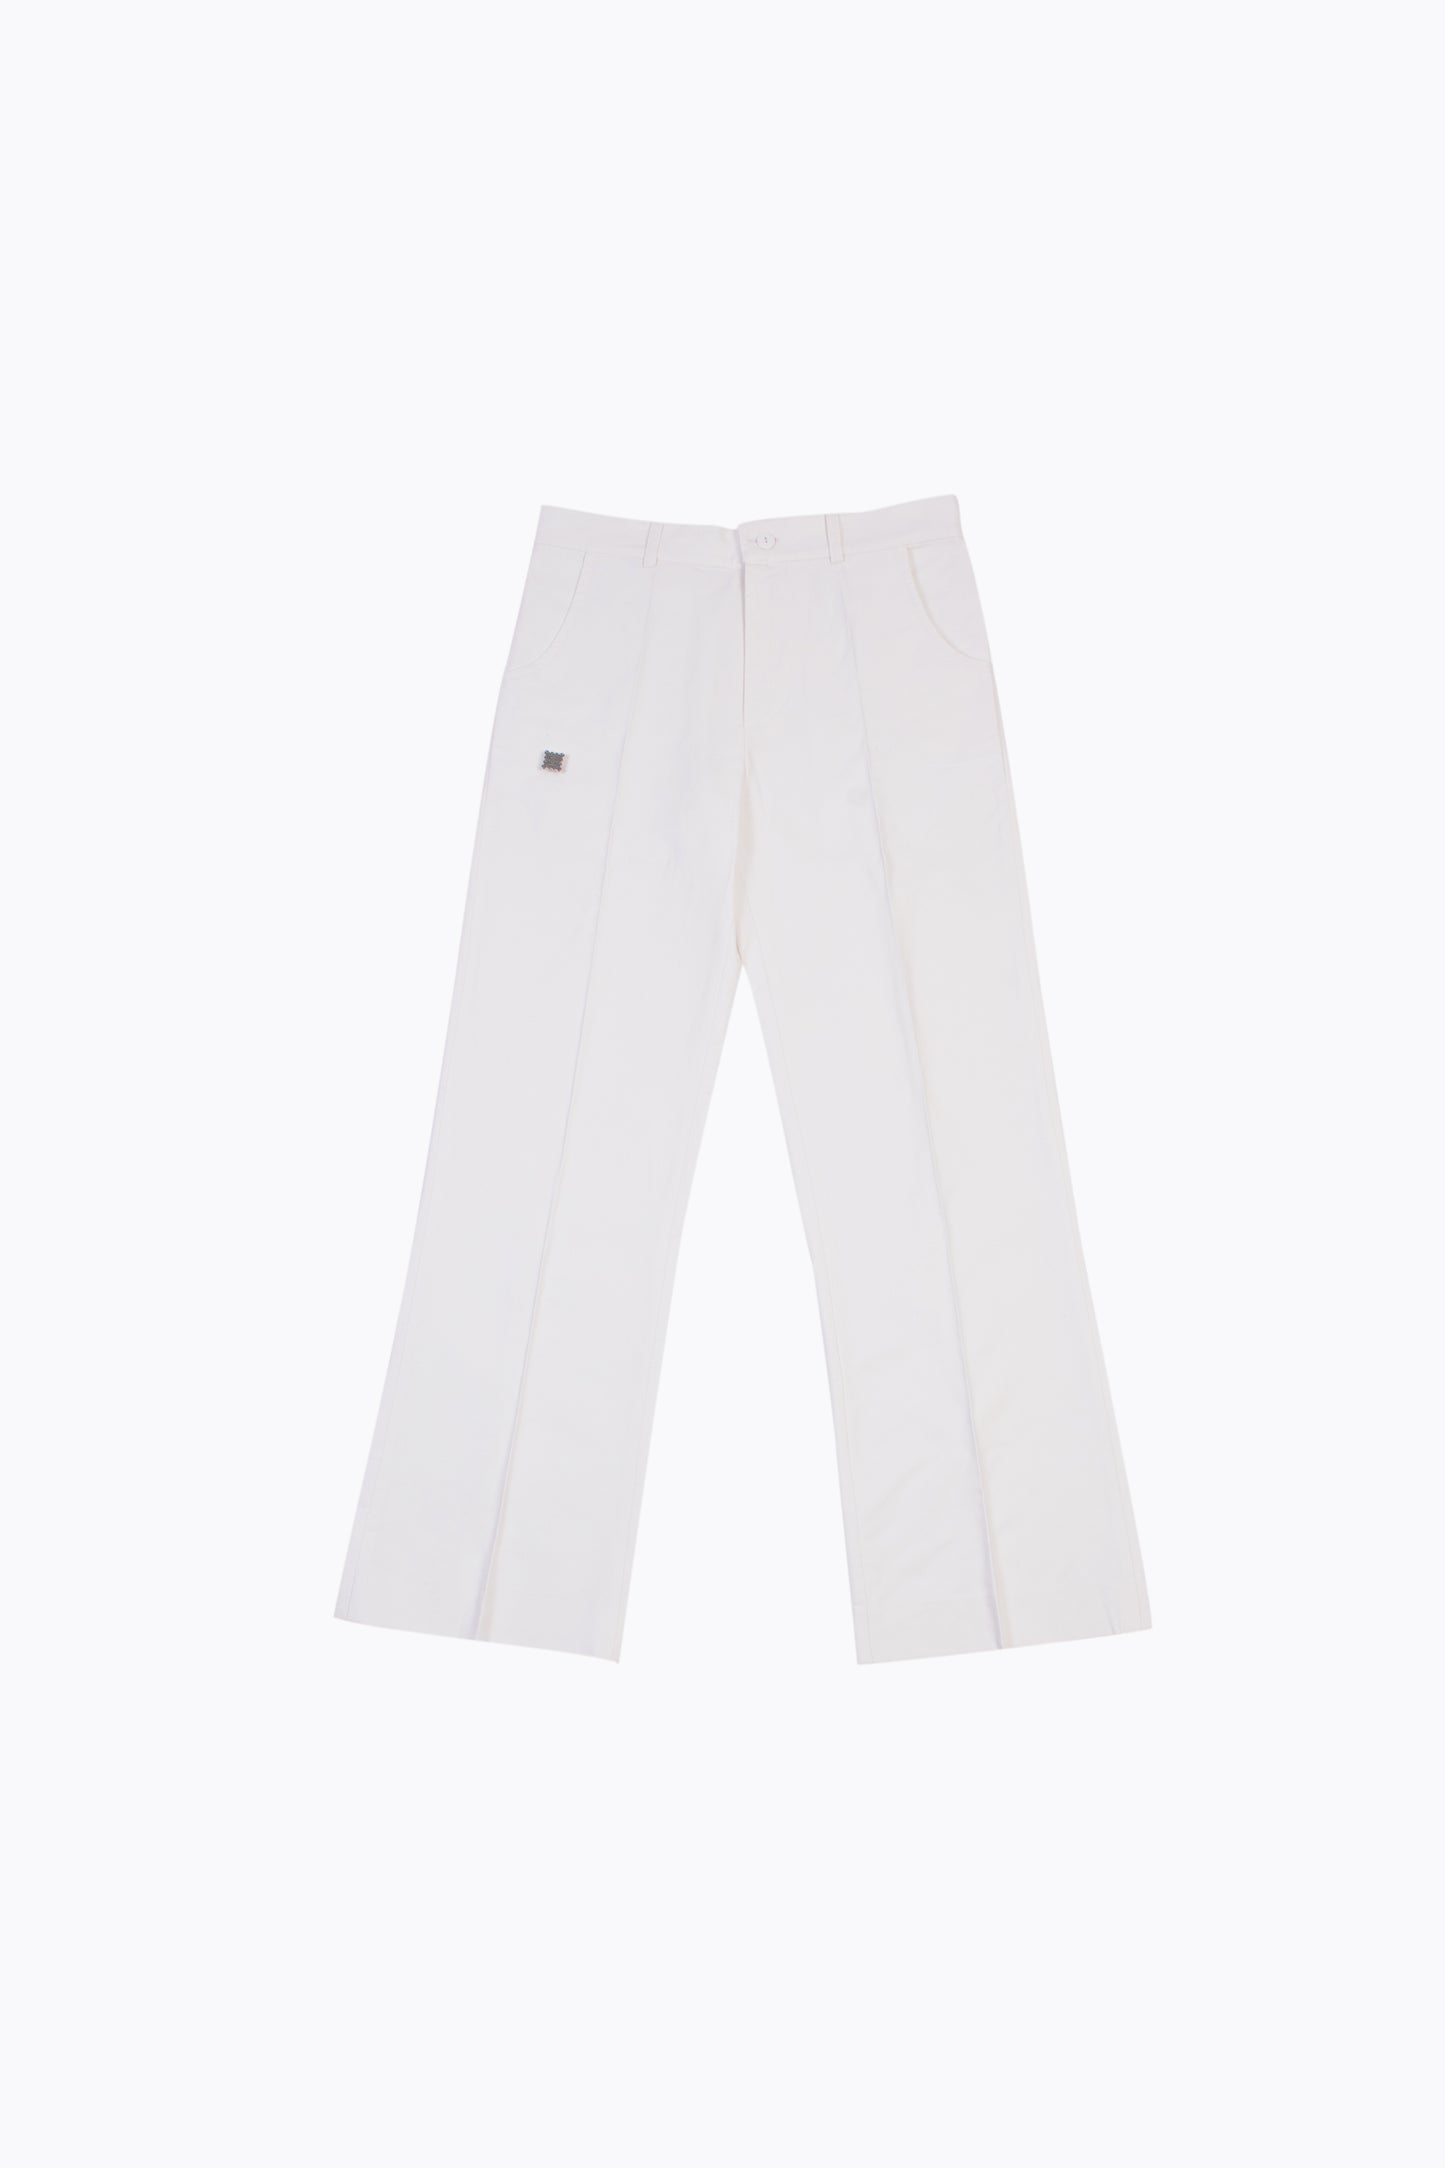 WHITE FLARED COTTON PANTS WITH UB BUTTON